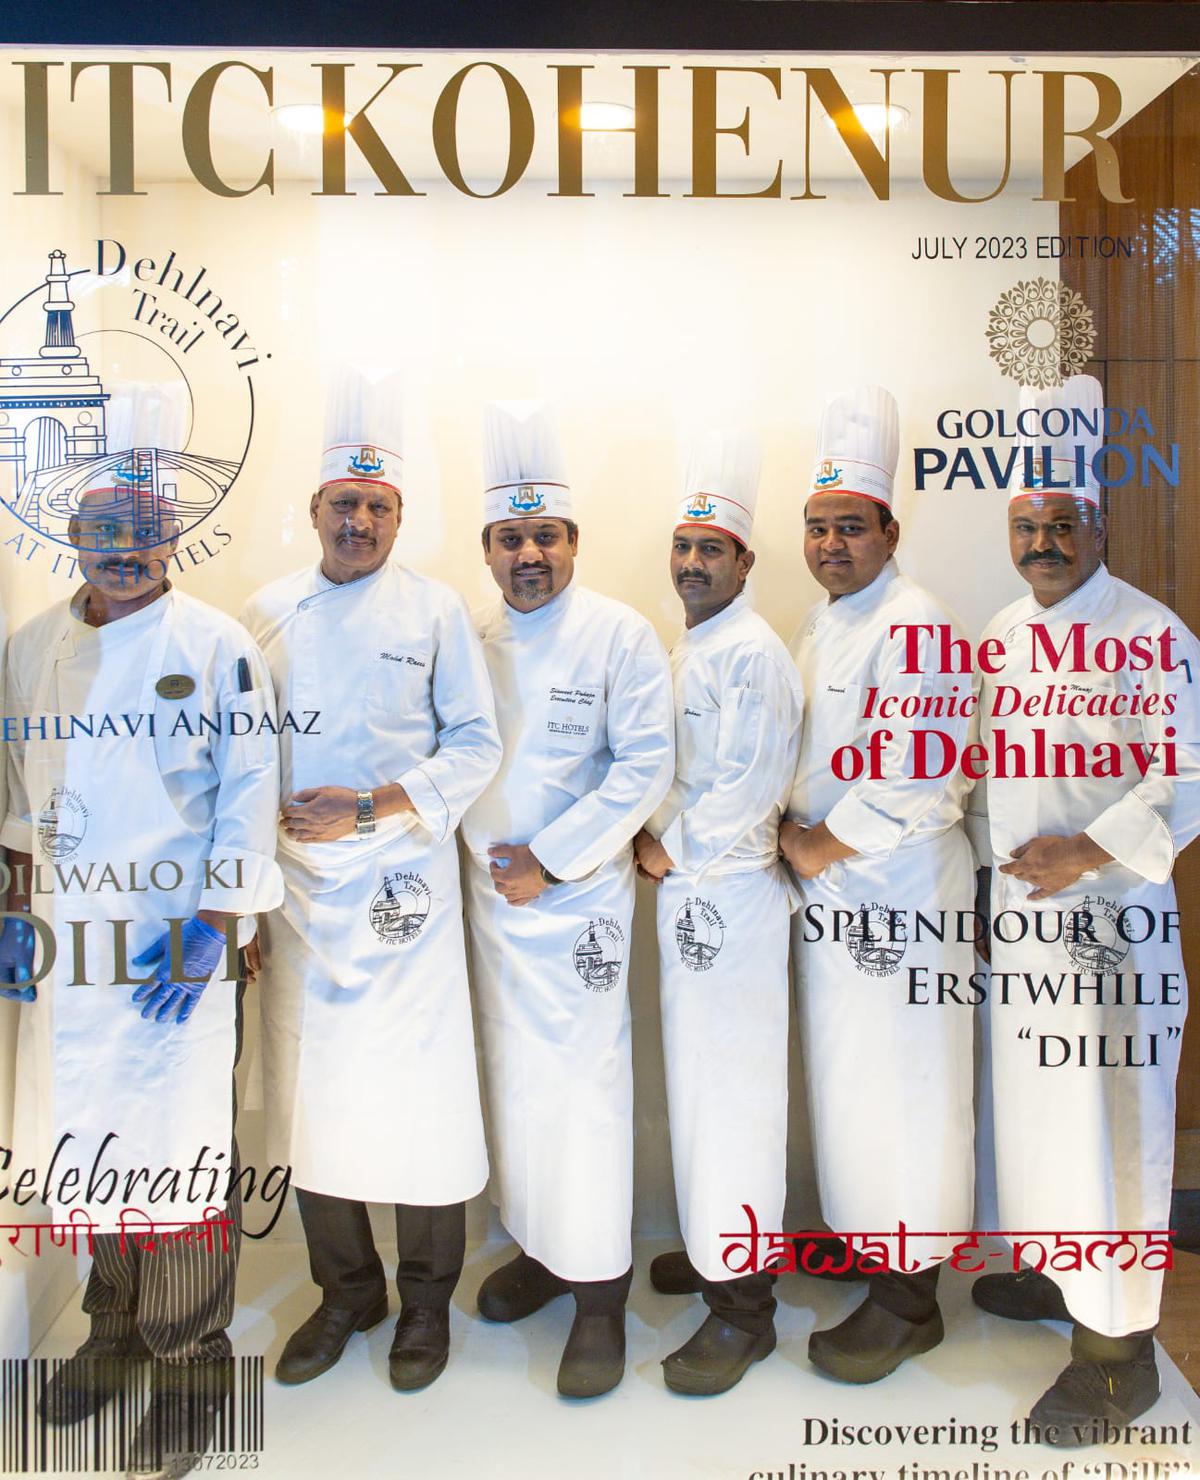 Chef Rais (second from left) with executive Chef of ITC Kohenur, Shivneet Pohoja next to him and the rest of the team 